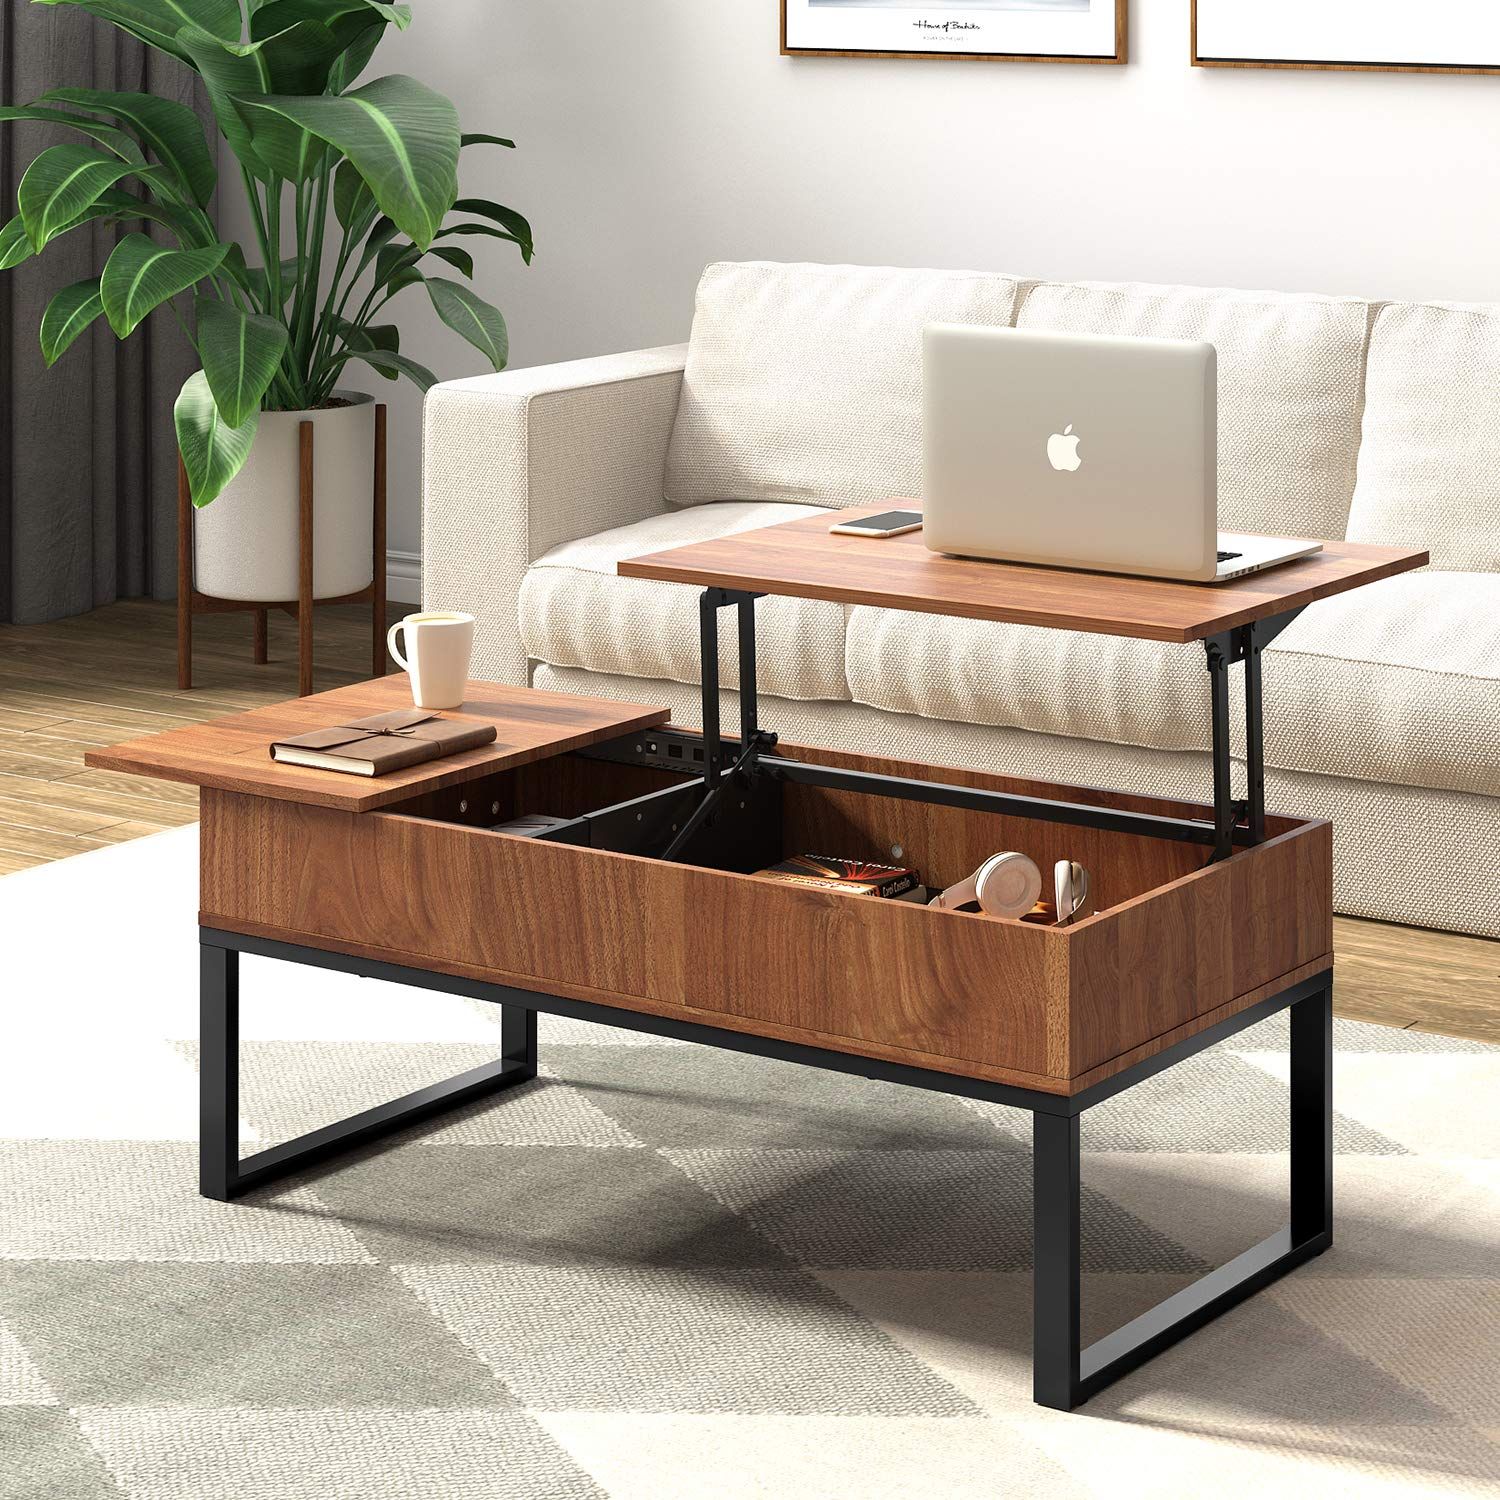 Wlive Wood Coffee Table With Adjustable Lift Top Table, Metal Frame Inside Wood Lift Top Coffee Tables (View 6 of 20)